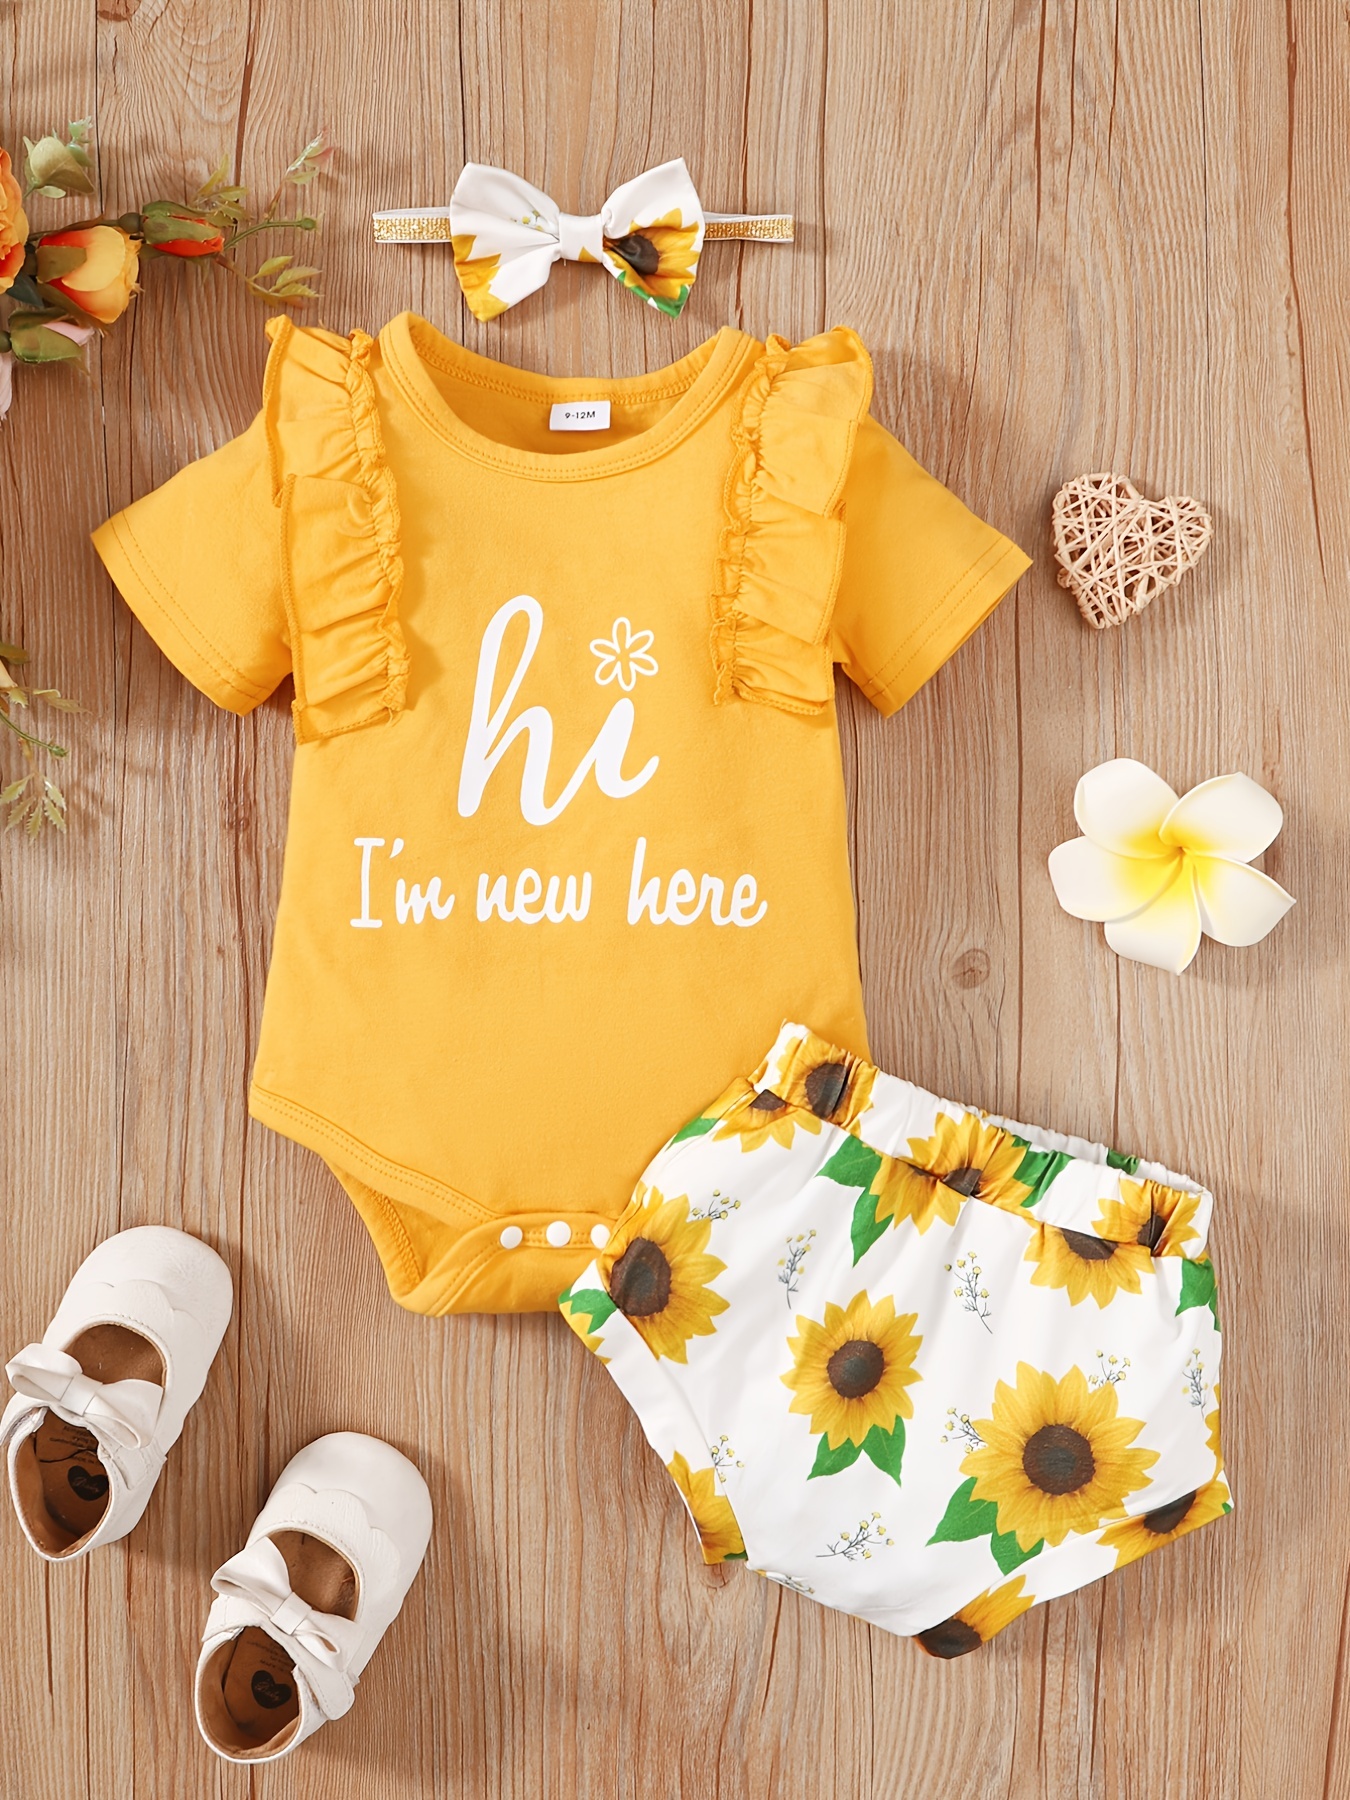 Newborn Infant Baby Girls Tops+Floral Sunflower Shorts+Headbands Outfits